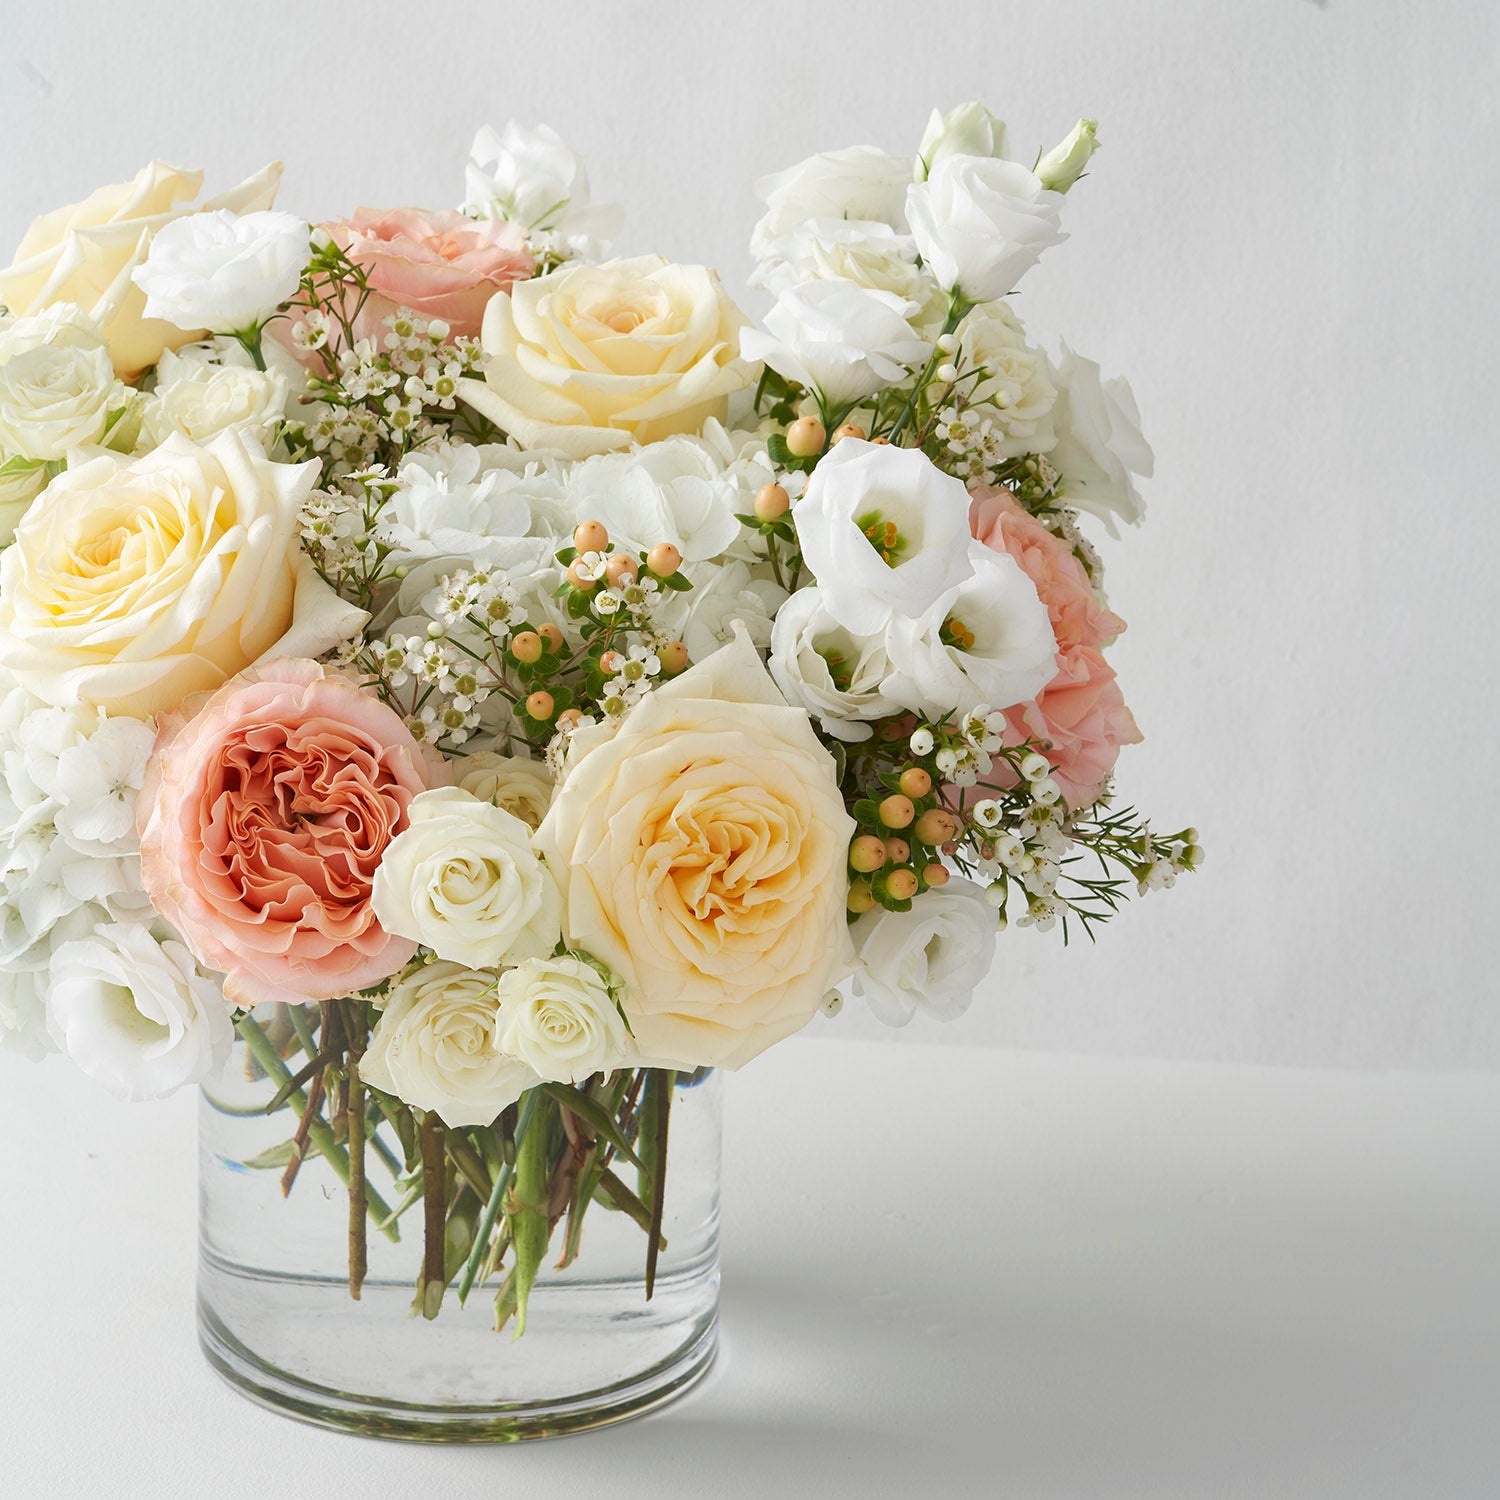 glass vase full of peach, cream and white flowers and berries.